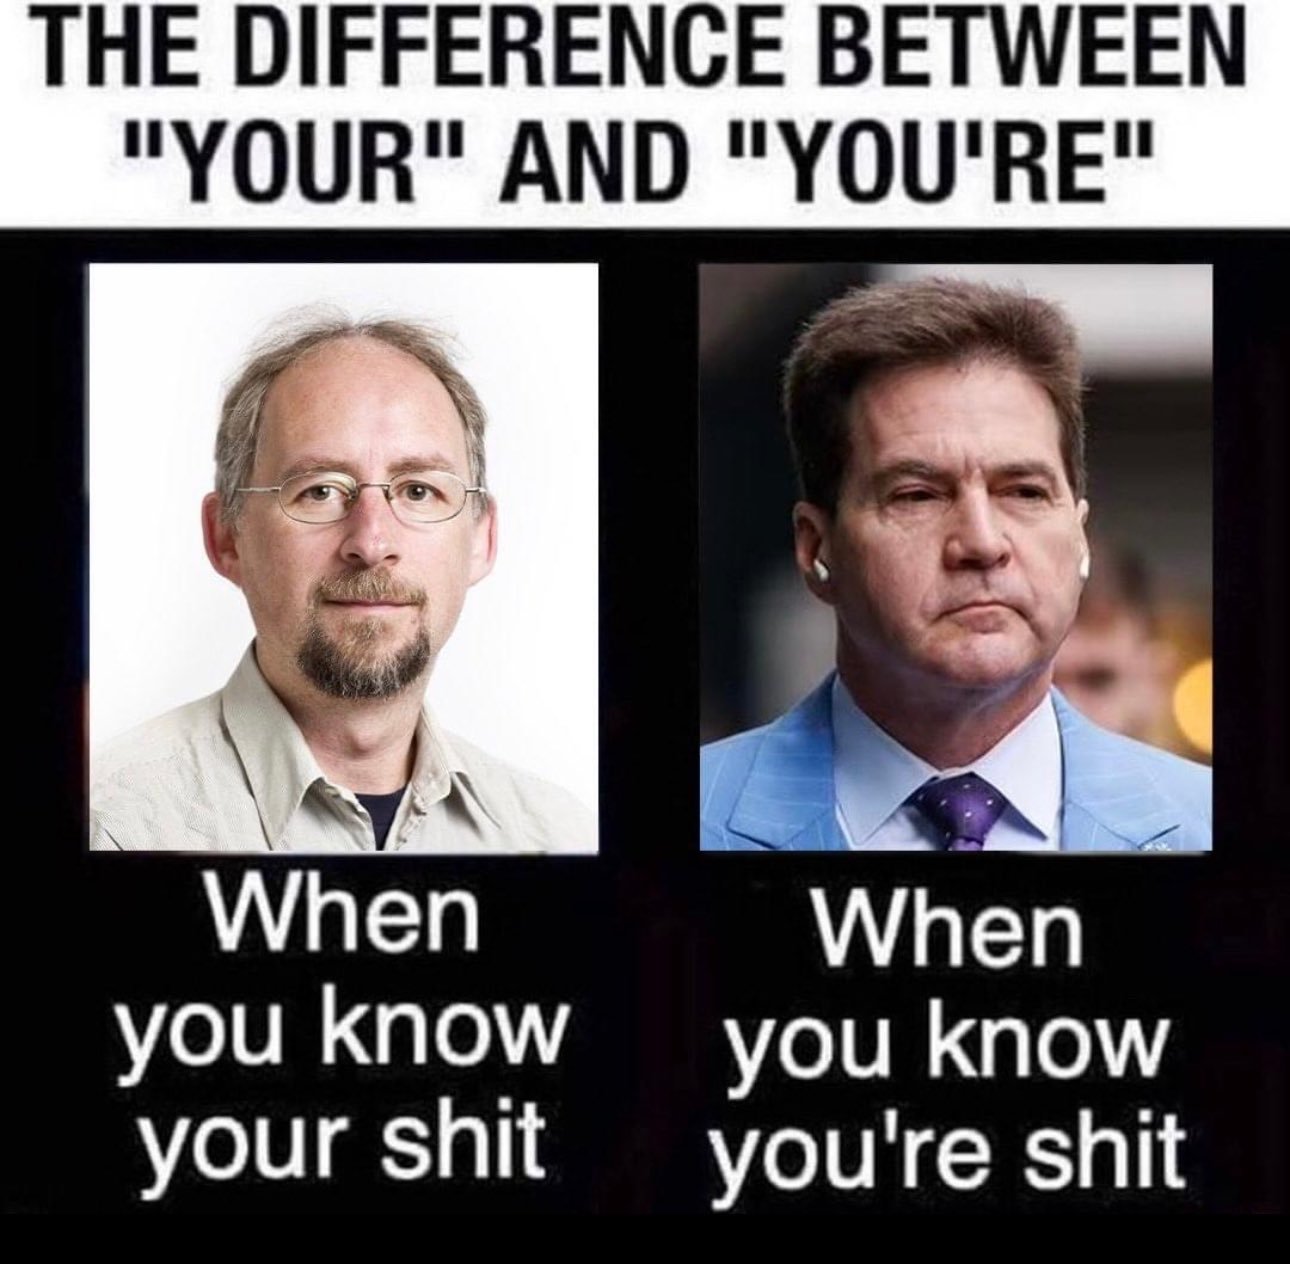 THE DIFFERENCE BETWEEN
"YOUR" AND "YOU'RE"
When When
you know you know
your shit ou're shi